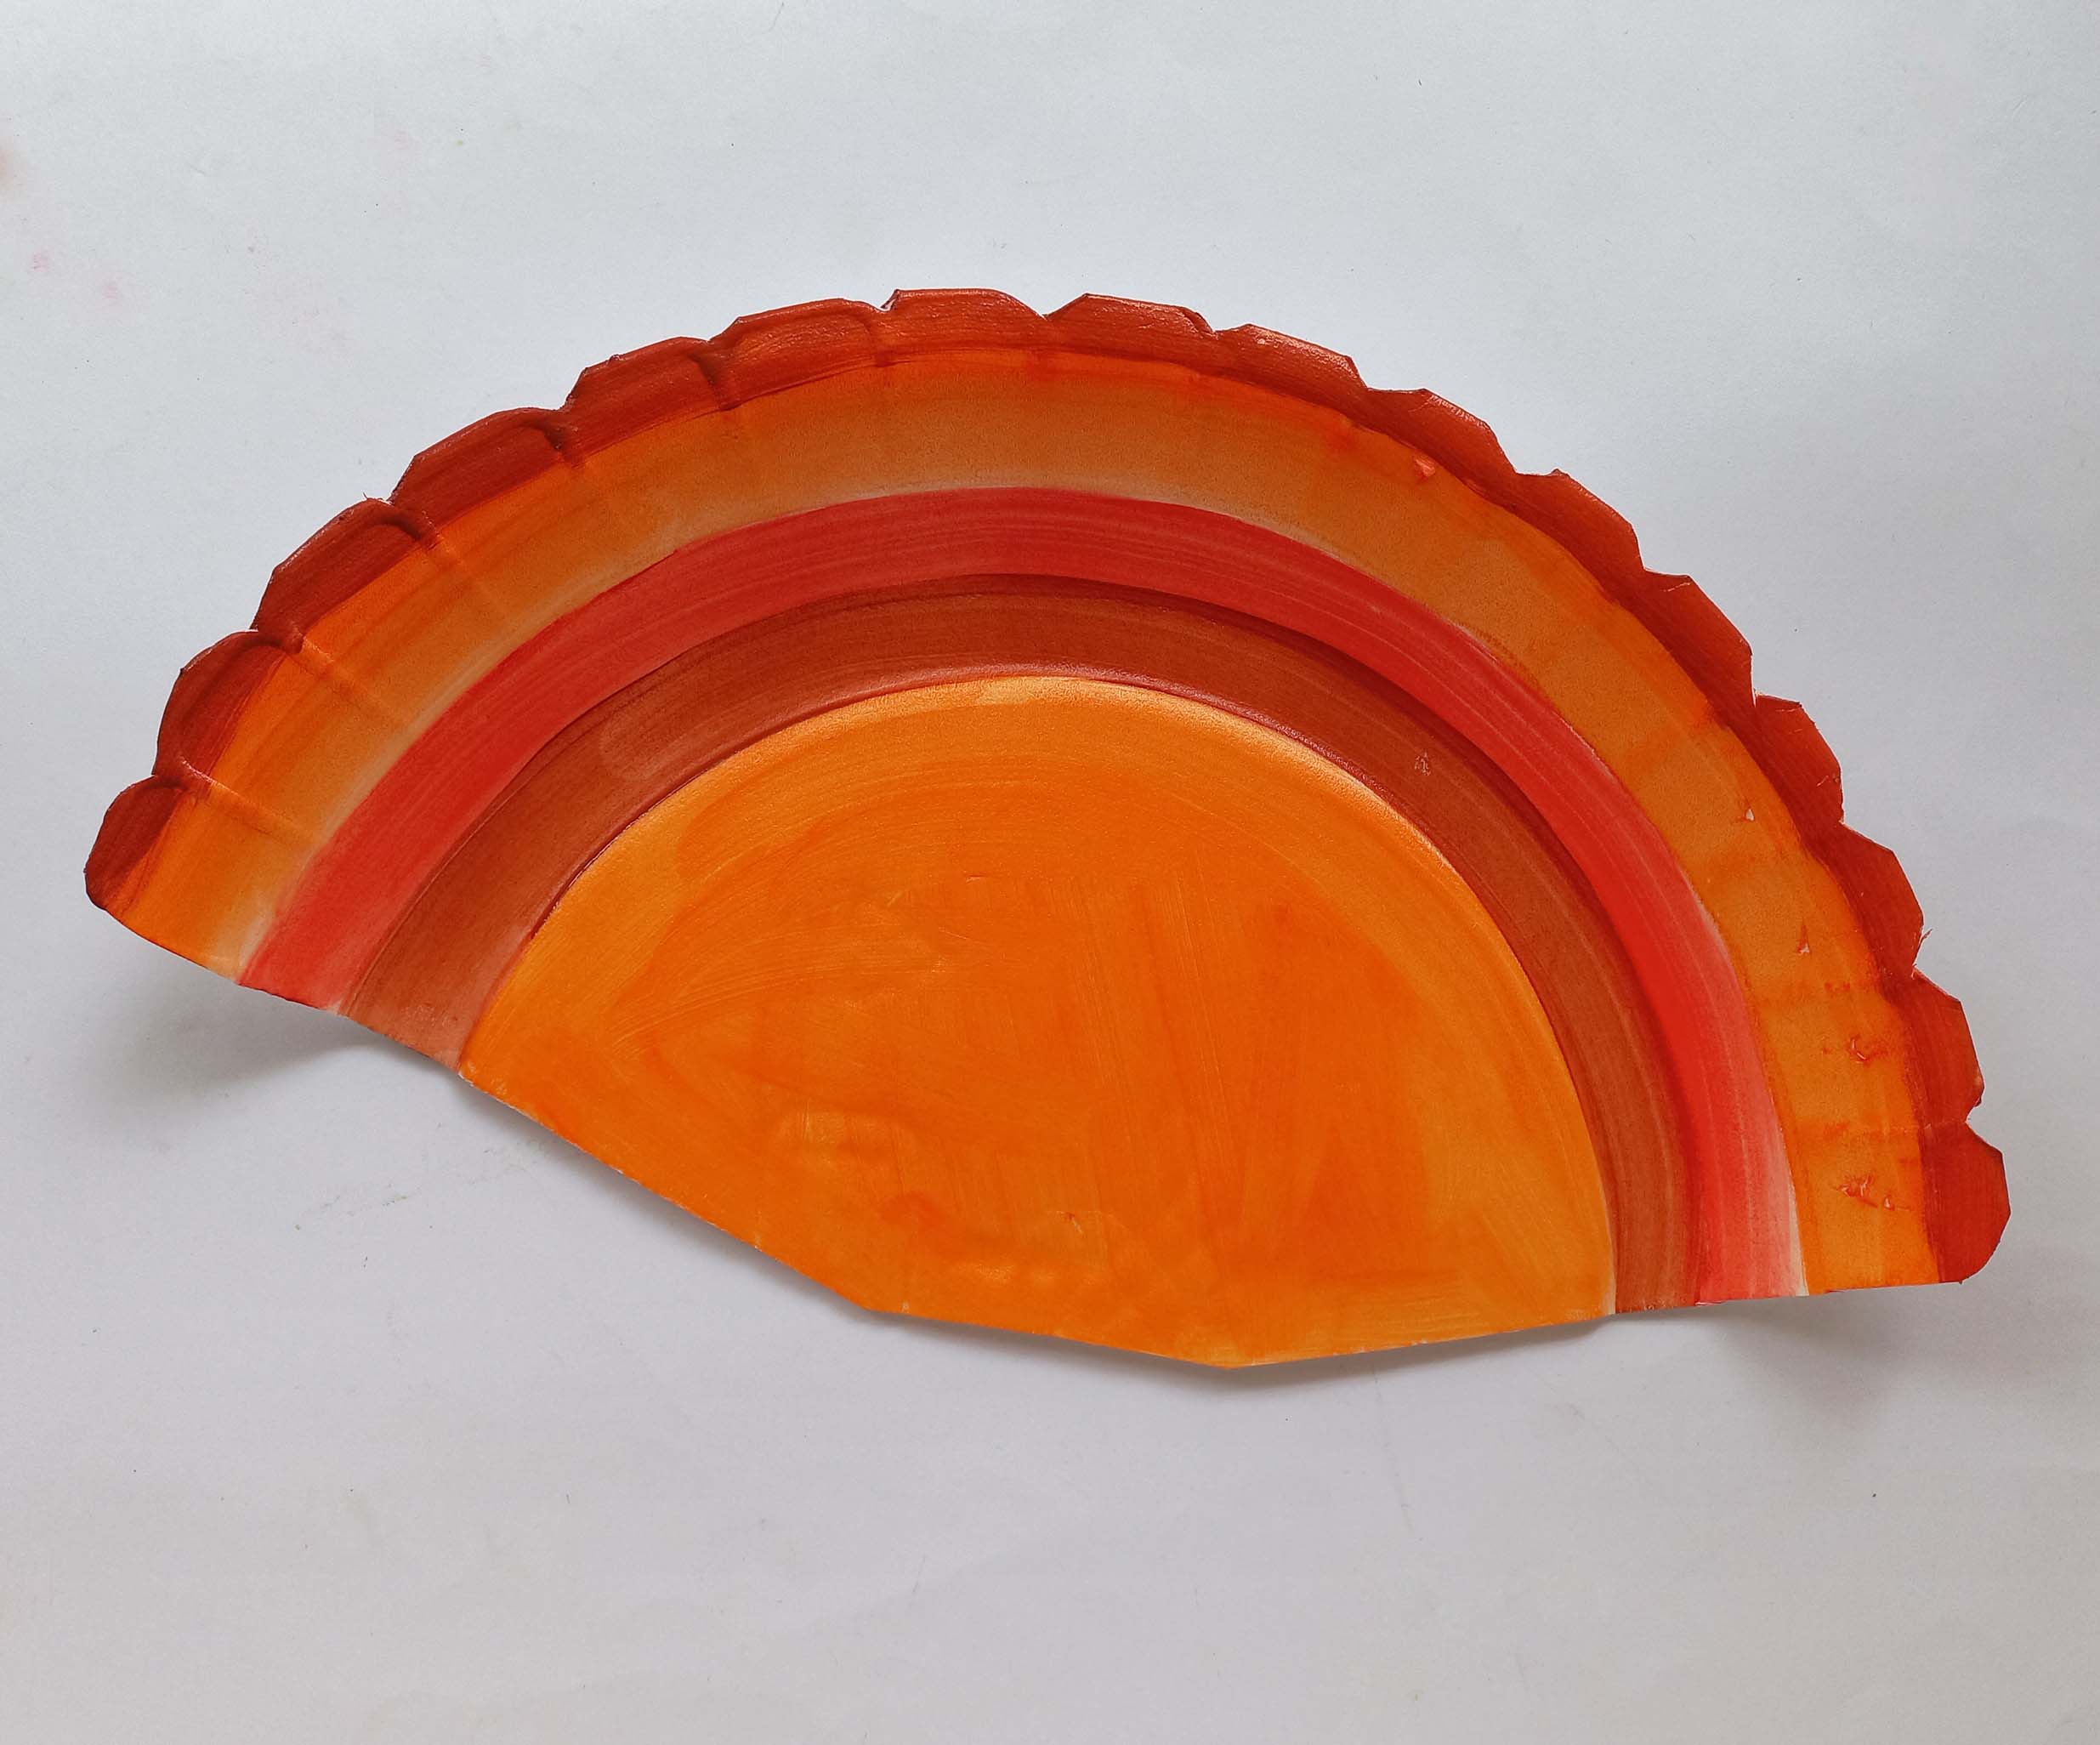 how to make a turkey from a paper plate